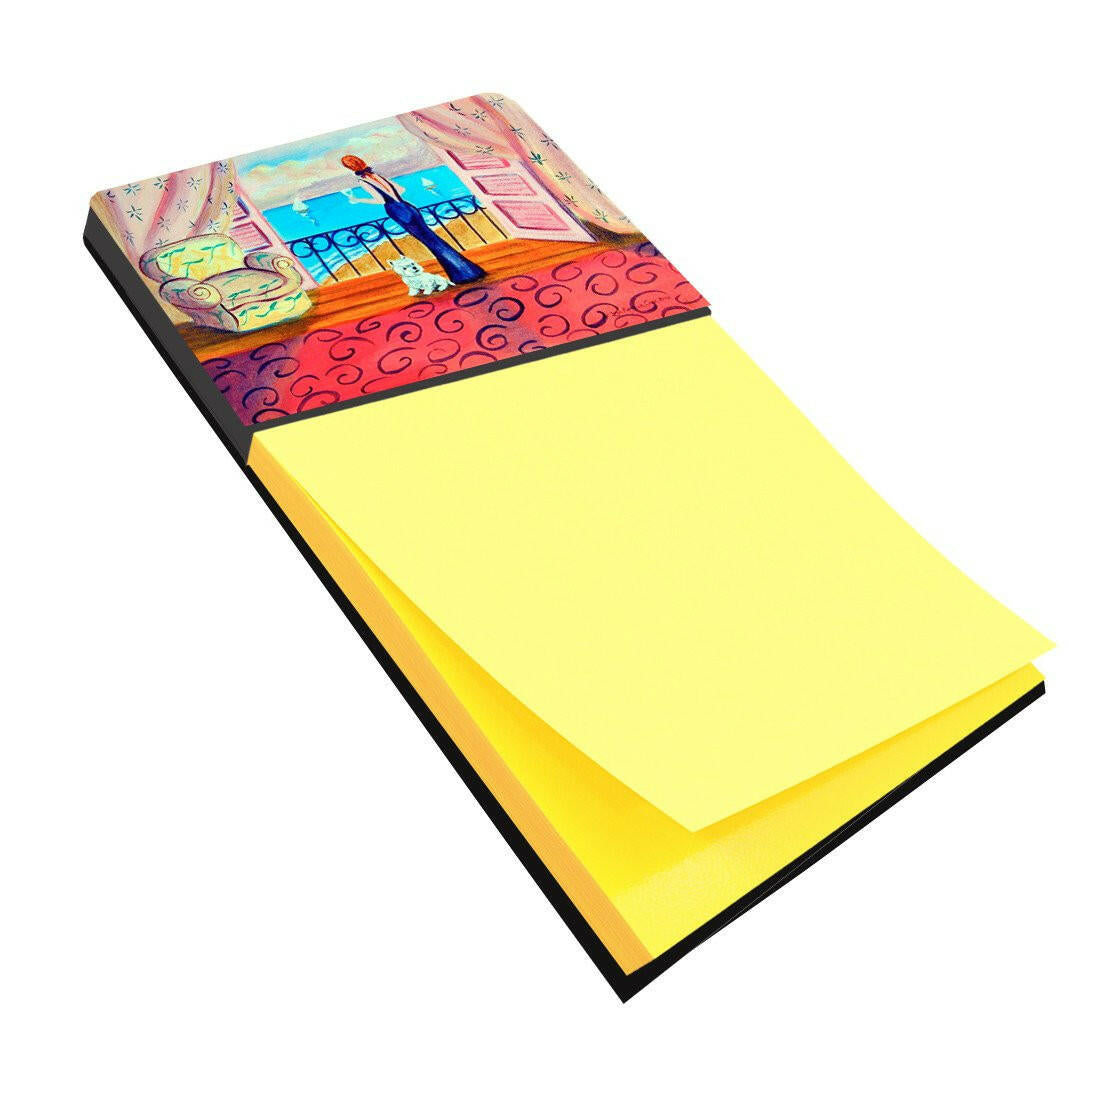 Westie with Mom and a view Refiillable Sticky Note Holder or Postit Note Dispenser 7125SN by Caroline's Treasures